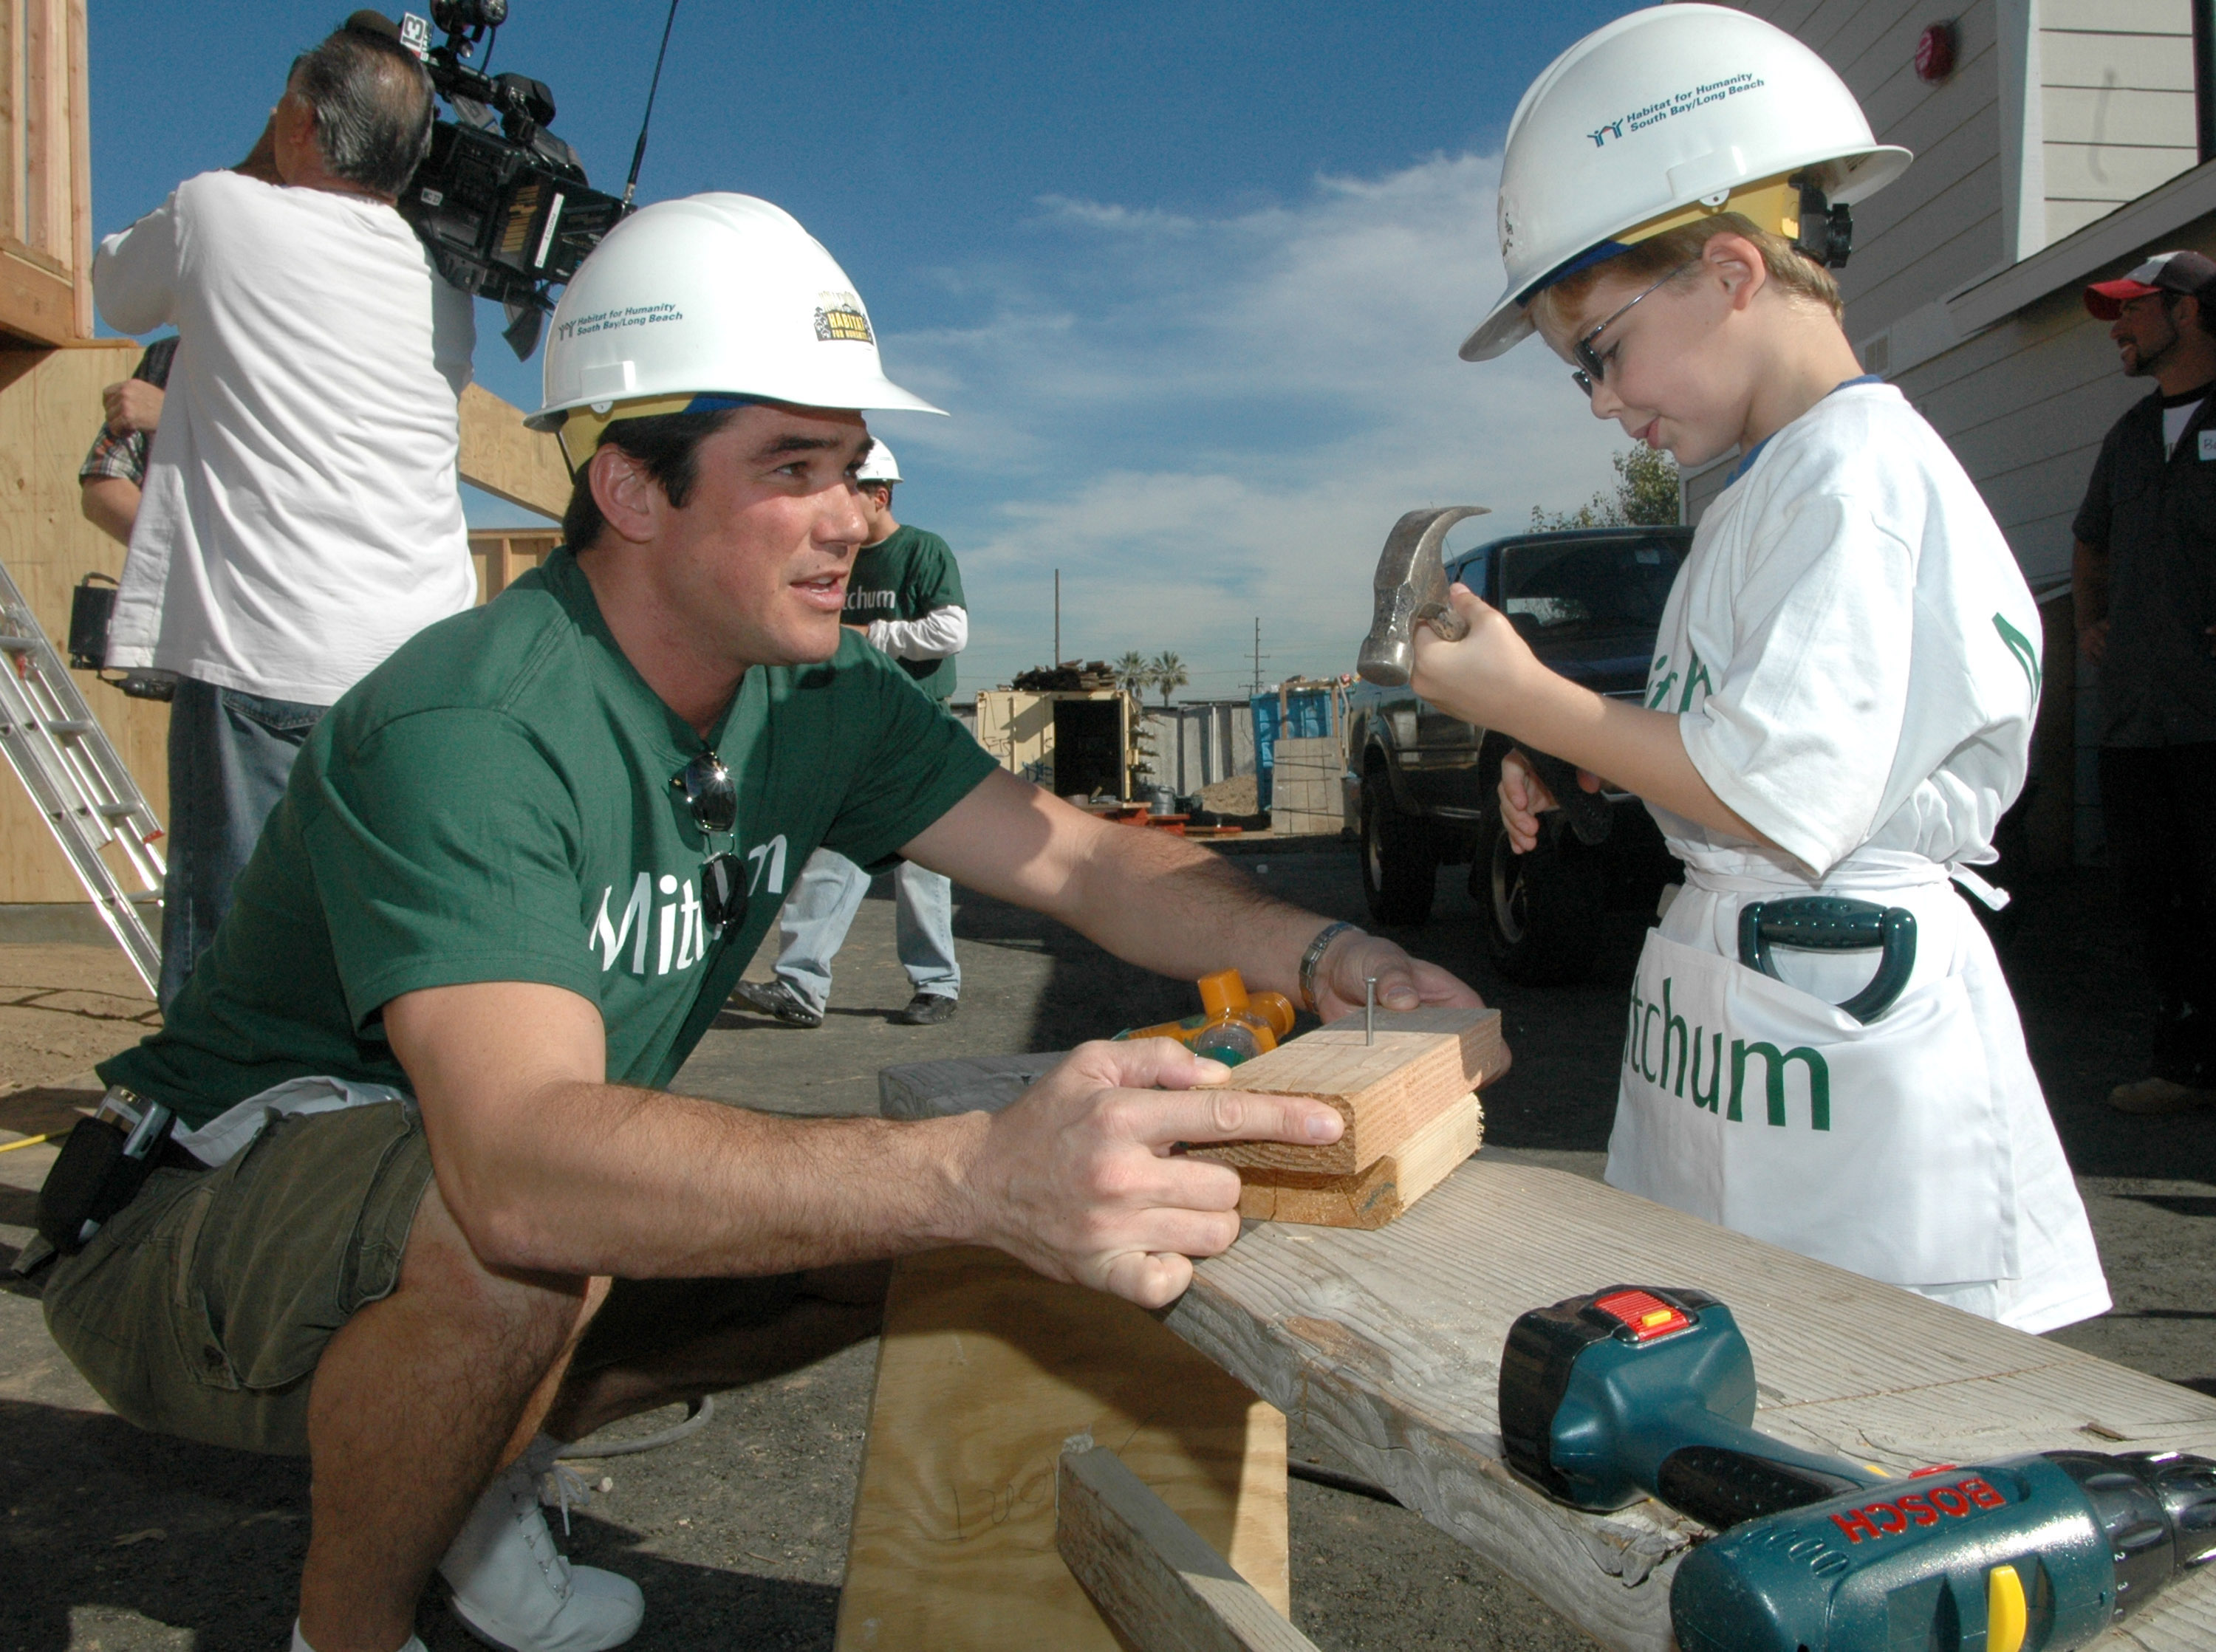 Dean Cain and his son, Christopher Cain, during Mitchum teams up with Habitat for Humanity to Build a "Sweet-Equity" Home at Plaza Del Amo in Torrance, California, on November 17, 2005 | Source: Getty Images